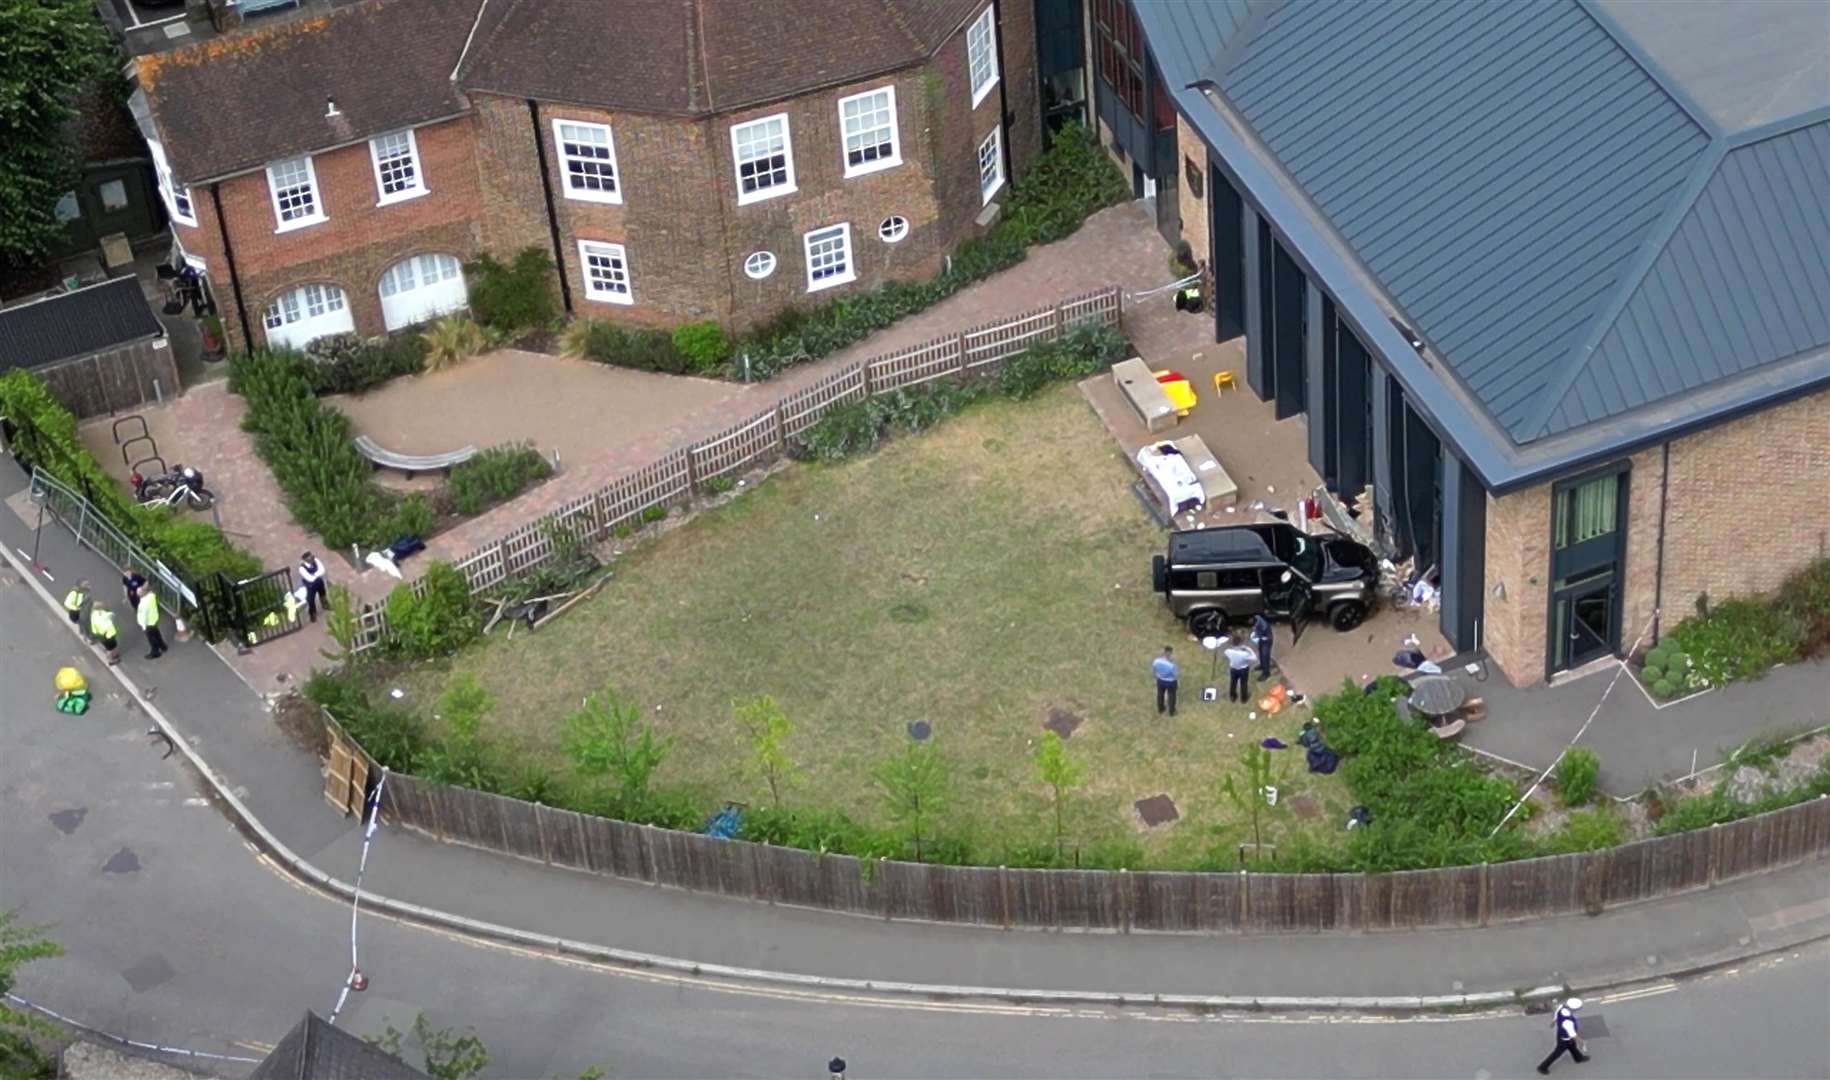 A woman was arrested after the fatal crash at The Study Preparatory School in Wimbledon, south-west London (Yui Mok/PA)